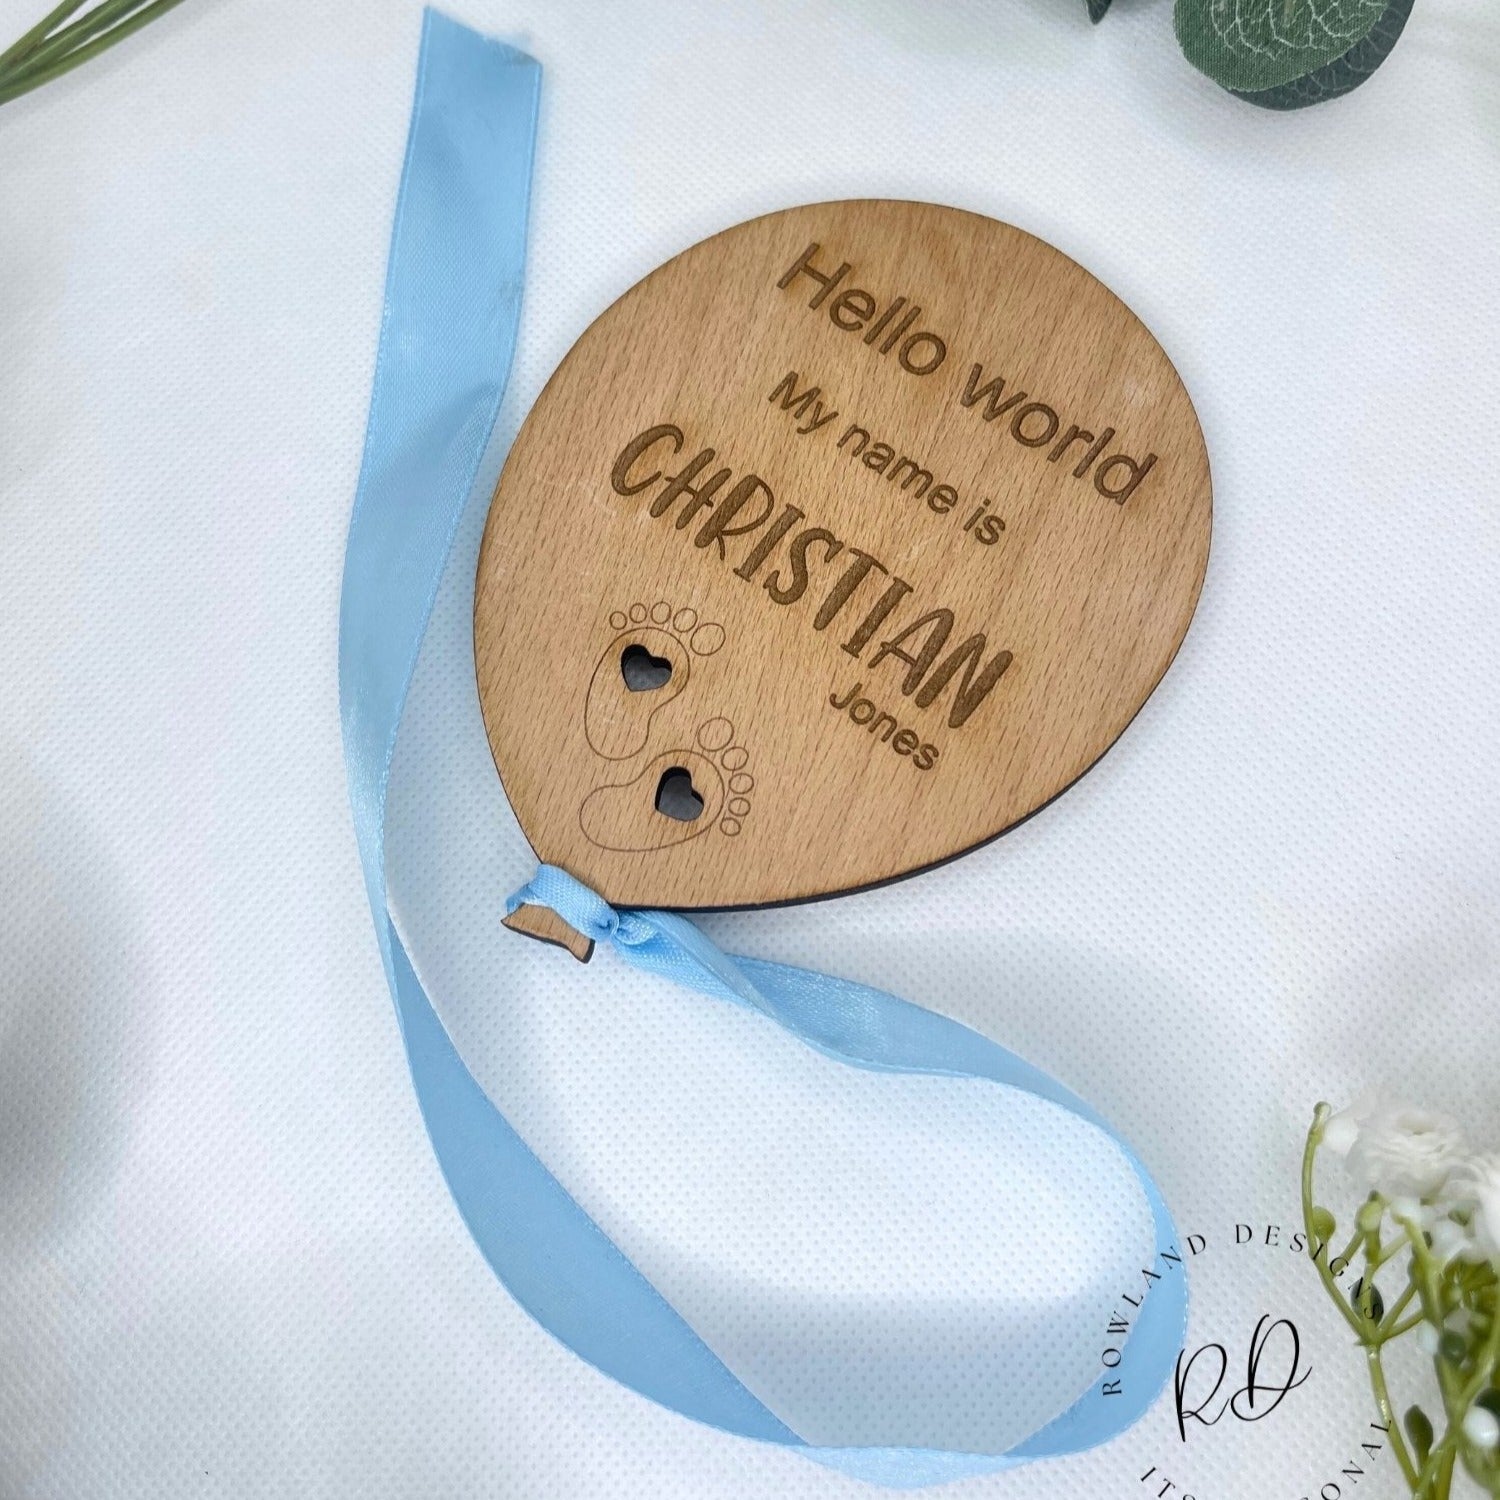 Crafted keepsake for baby showers, featuring intricate details and a choice of ribbon colors